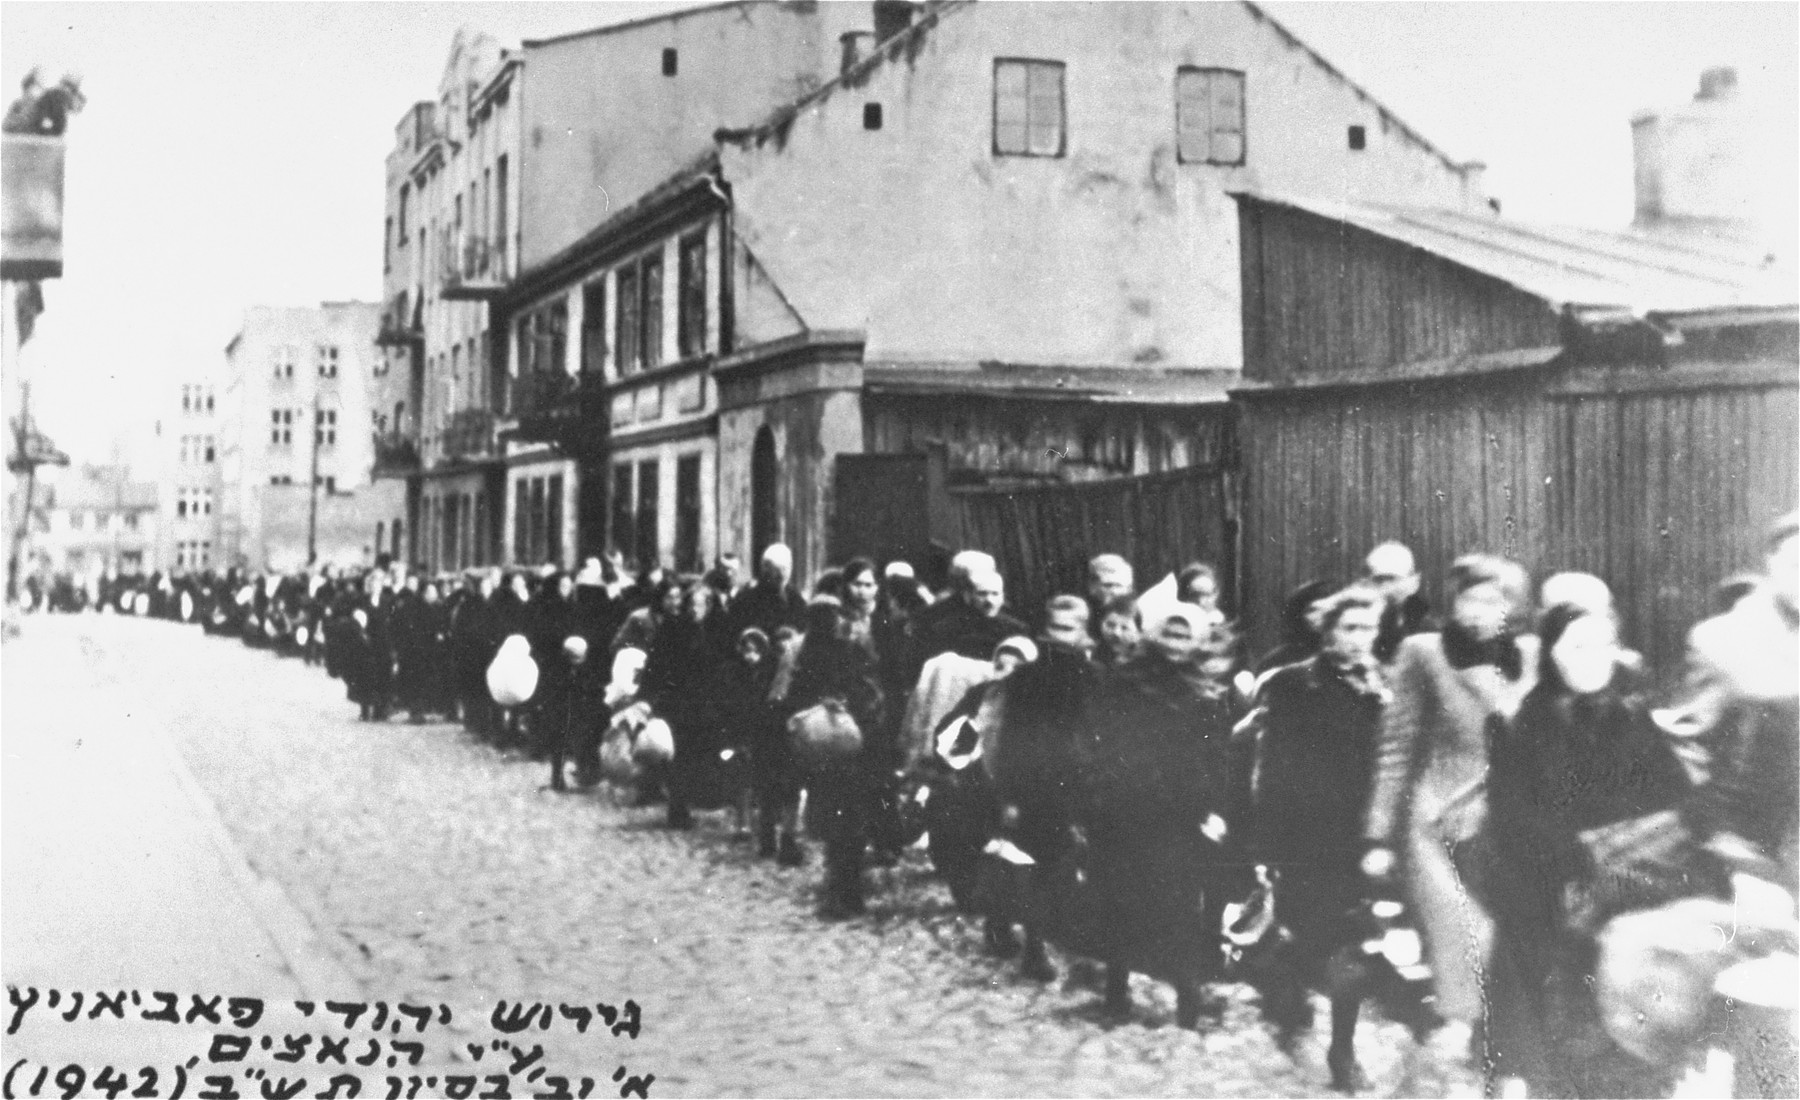 A long column of Jews marches through the streets of Pabianice during a deportation action.